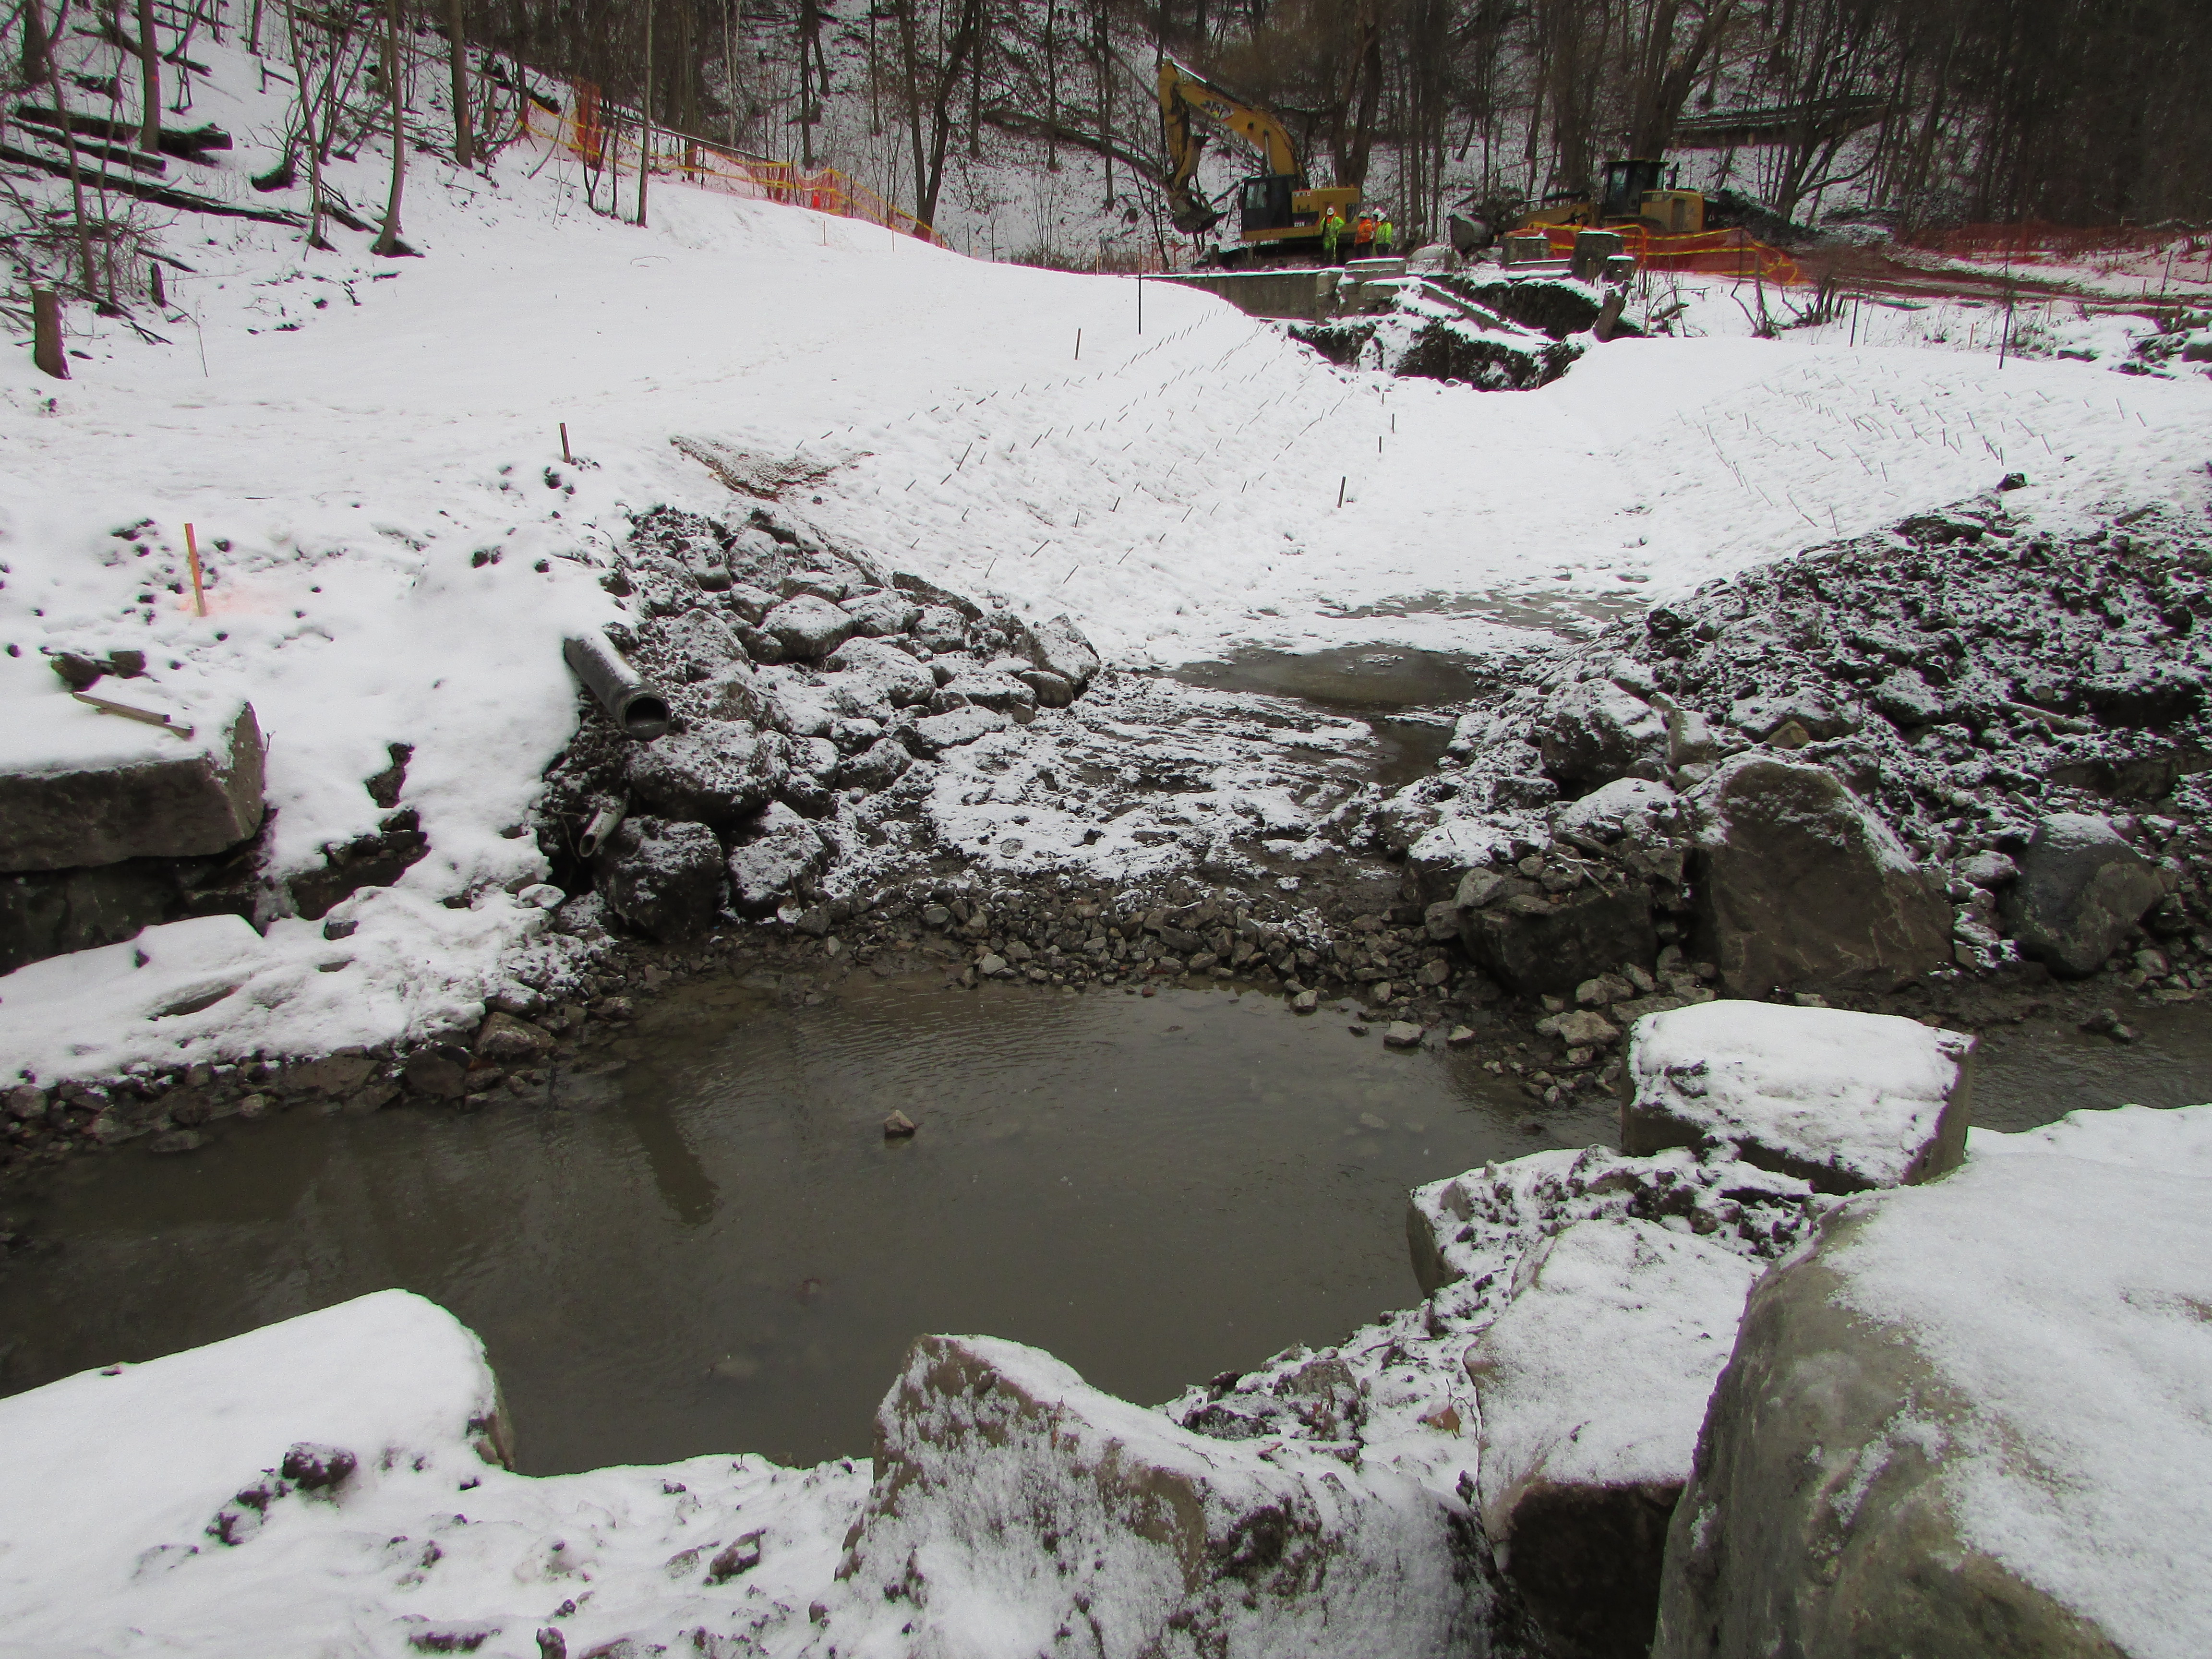 TRCA construction staff can be seen in the distance working with the excavator to prepare the upstream section of Yellow Creek for the dismantling of the stone and mortar retaining wall. Source: TRCA, 2019.